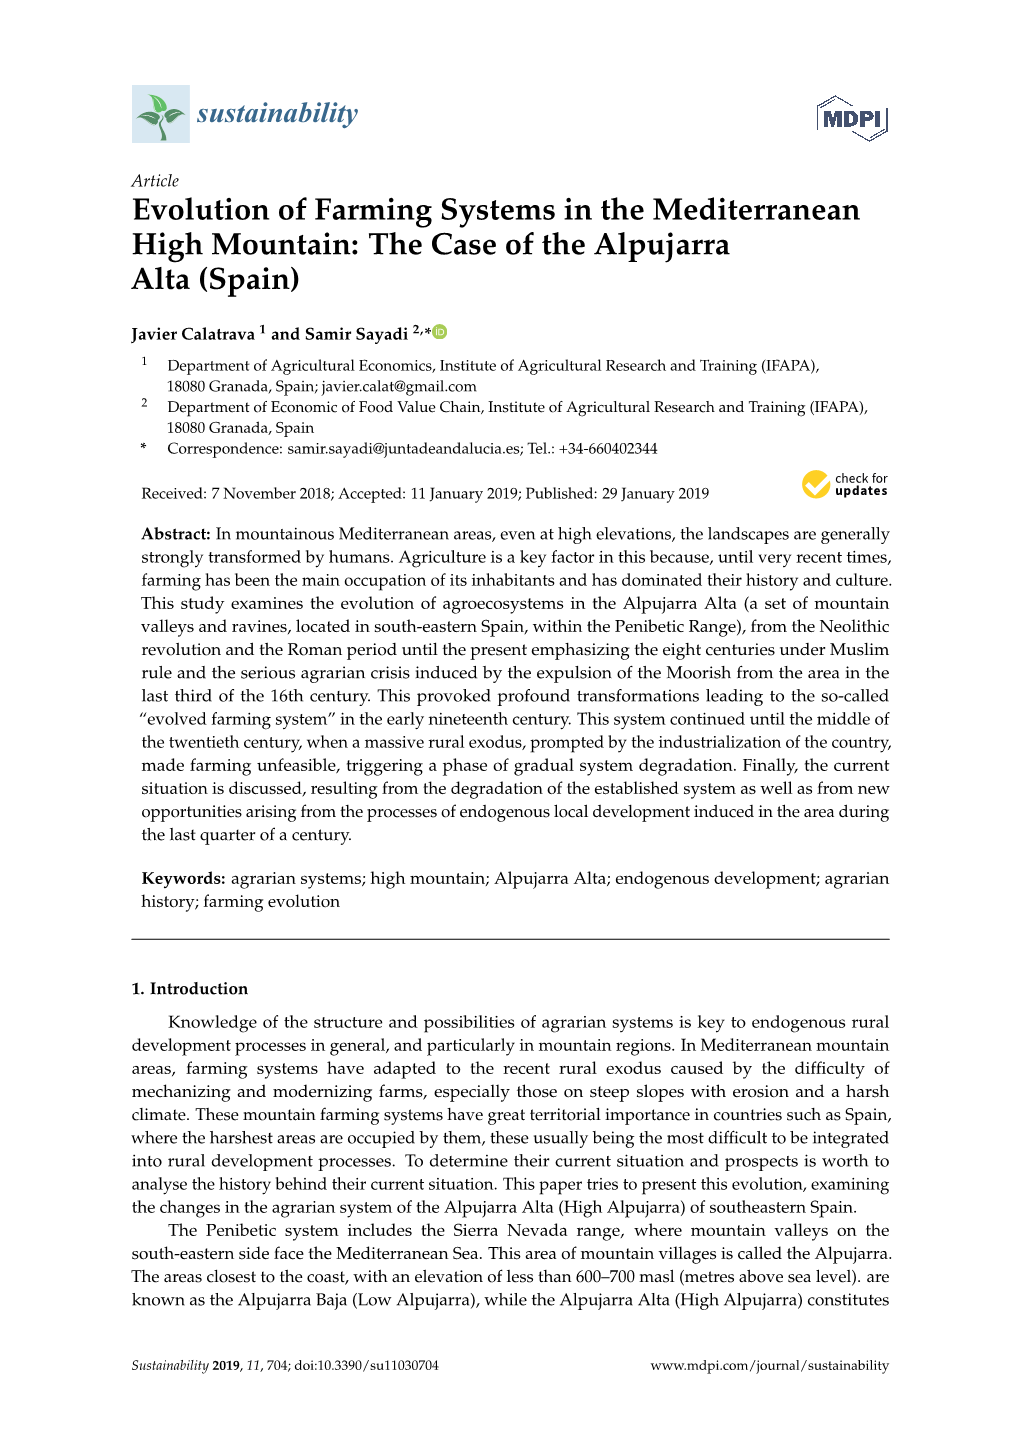 Evolution of Farming Systems in the Mediterranean High Mountain: the Case of the Alpujarra Alta (Spain)